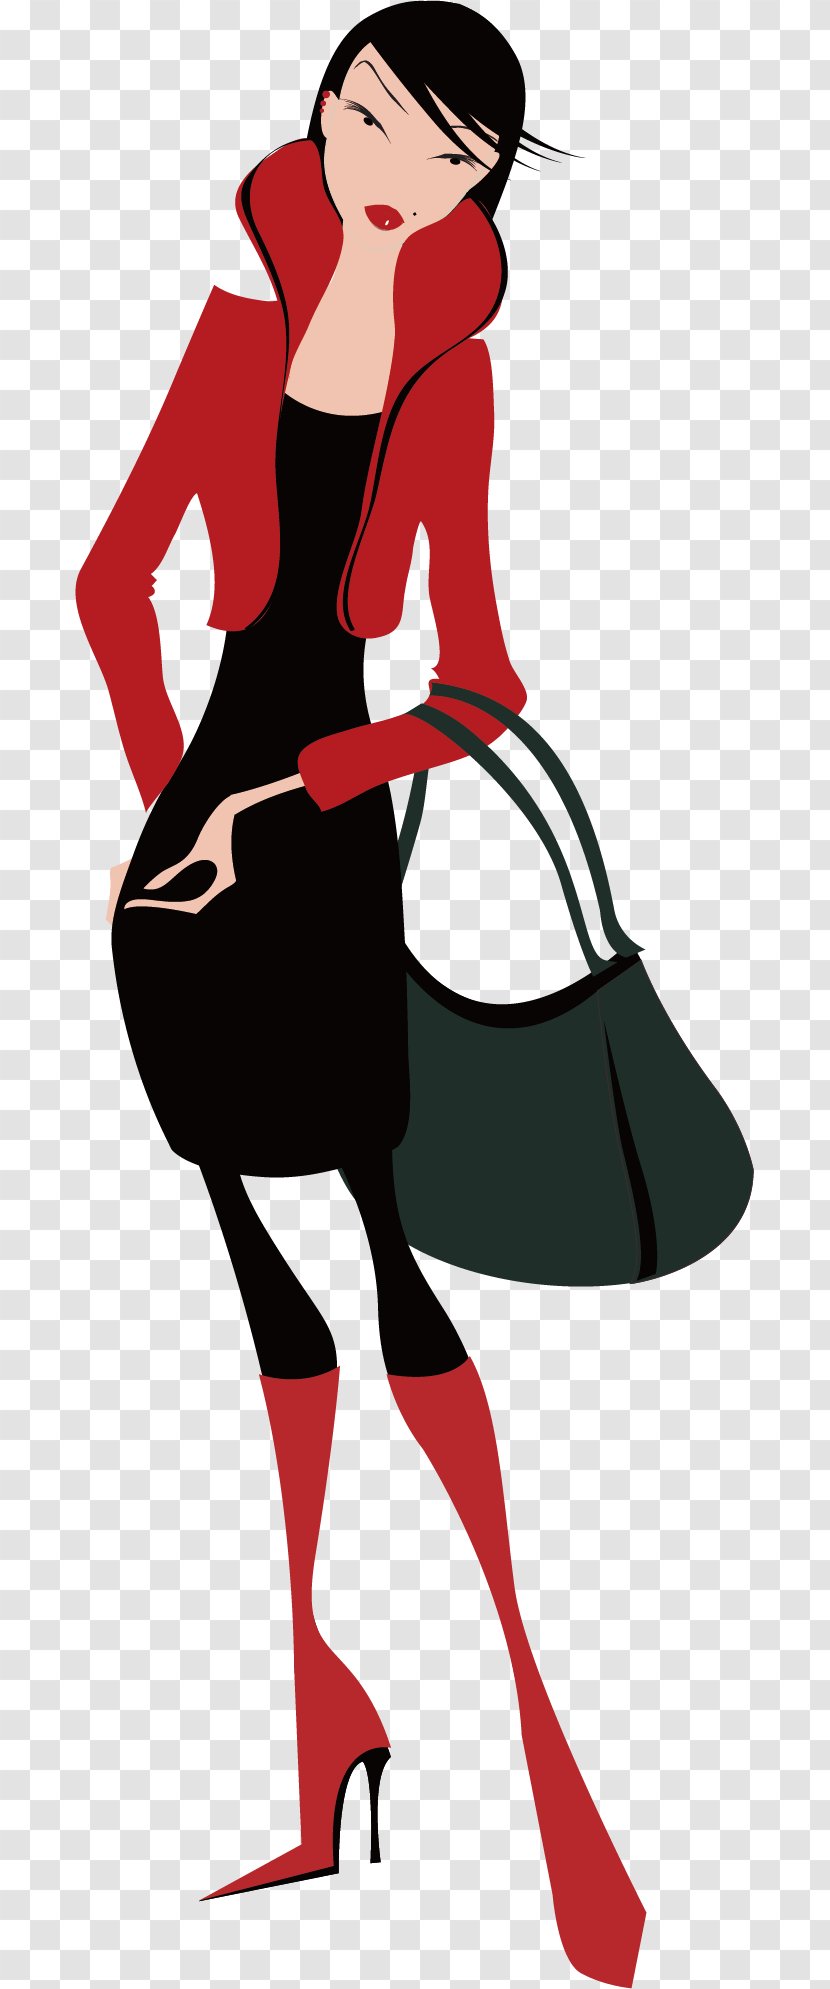 Fashion Model Cartoon Illustration - Tree - Take Pictures Of The Transparent PNG